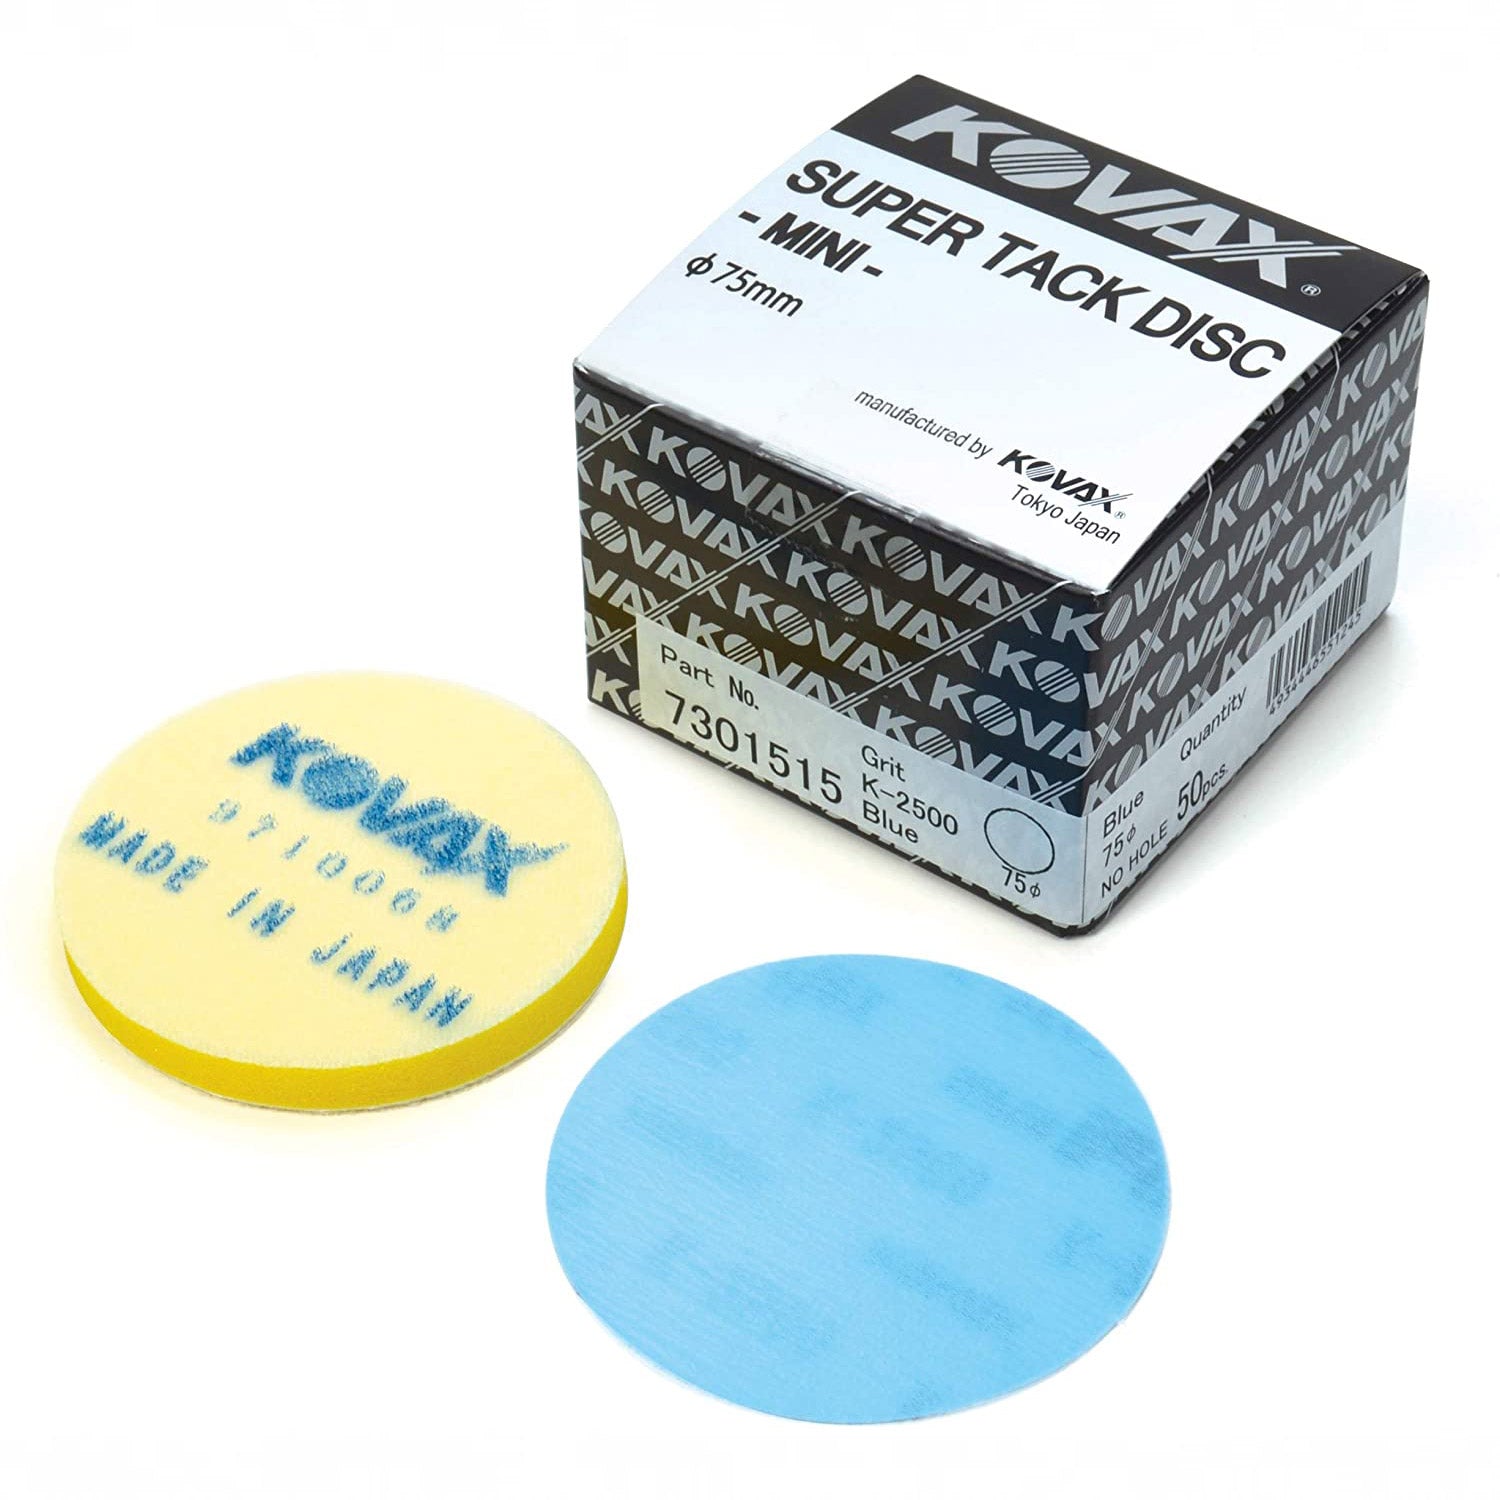 kovax-sandpaper-3-inch-2500-grit-blue-sanding-discs-with-interface-pad